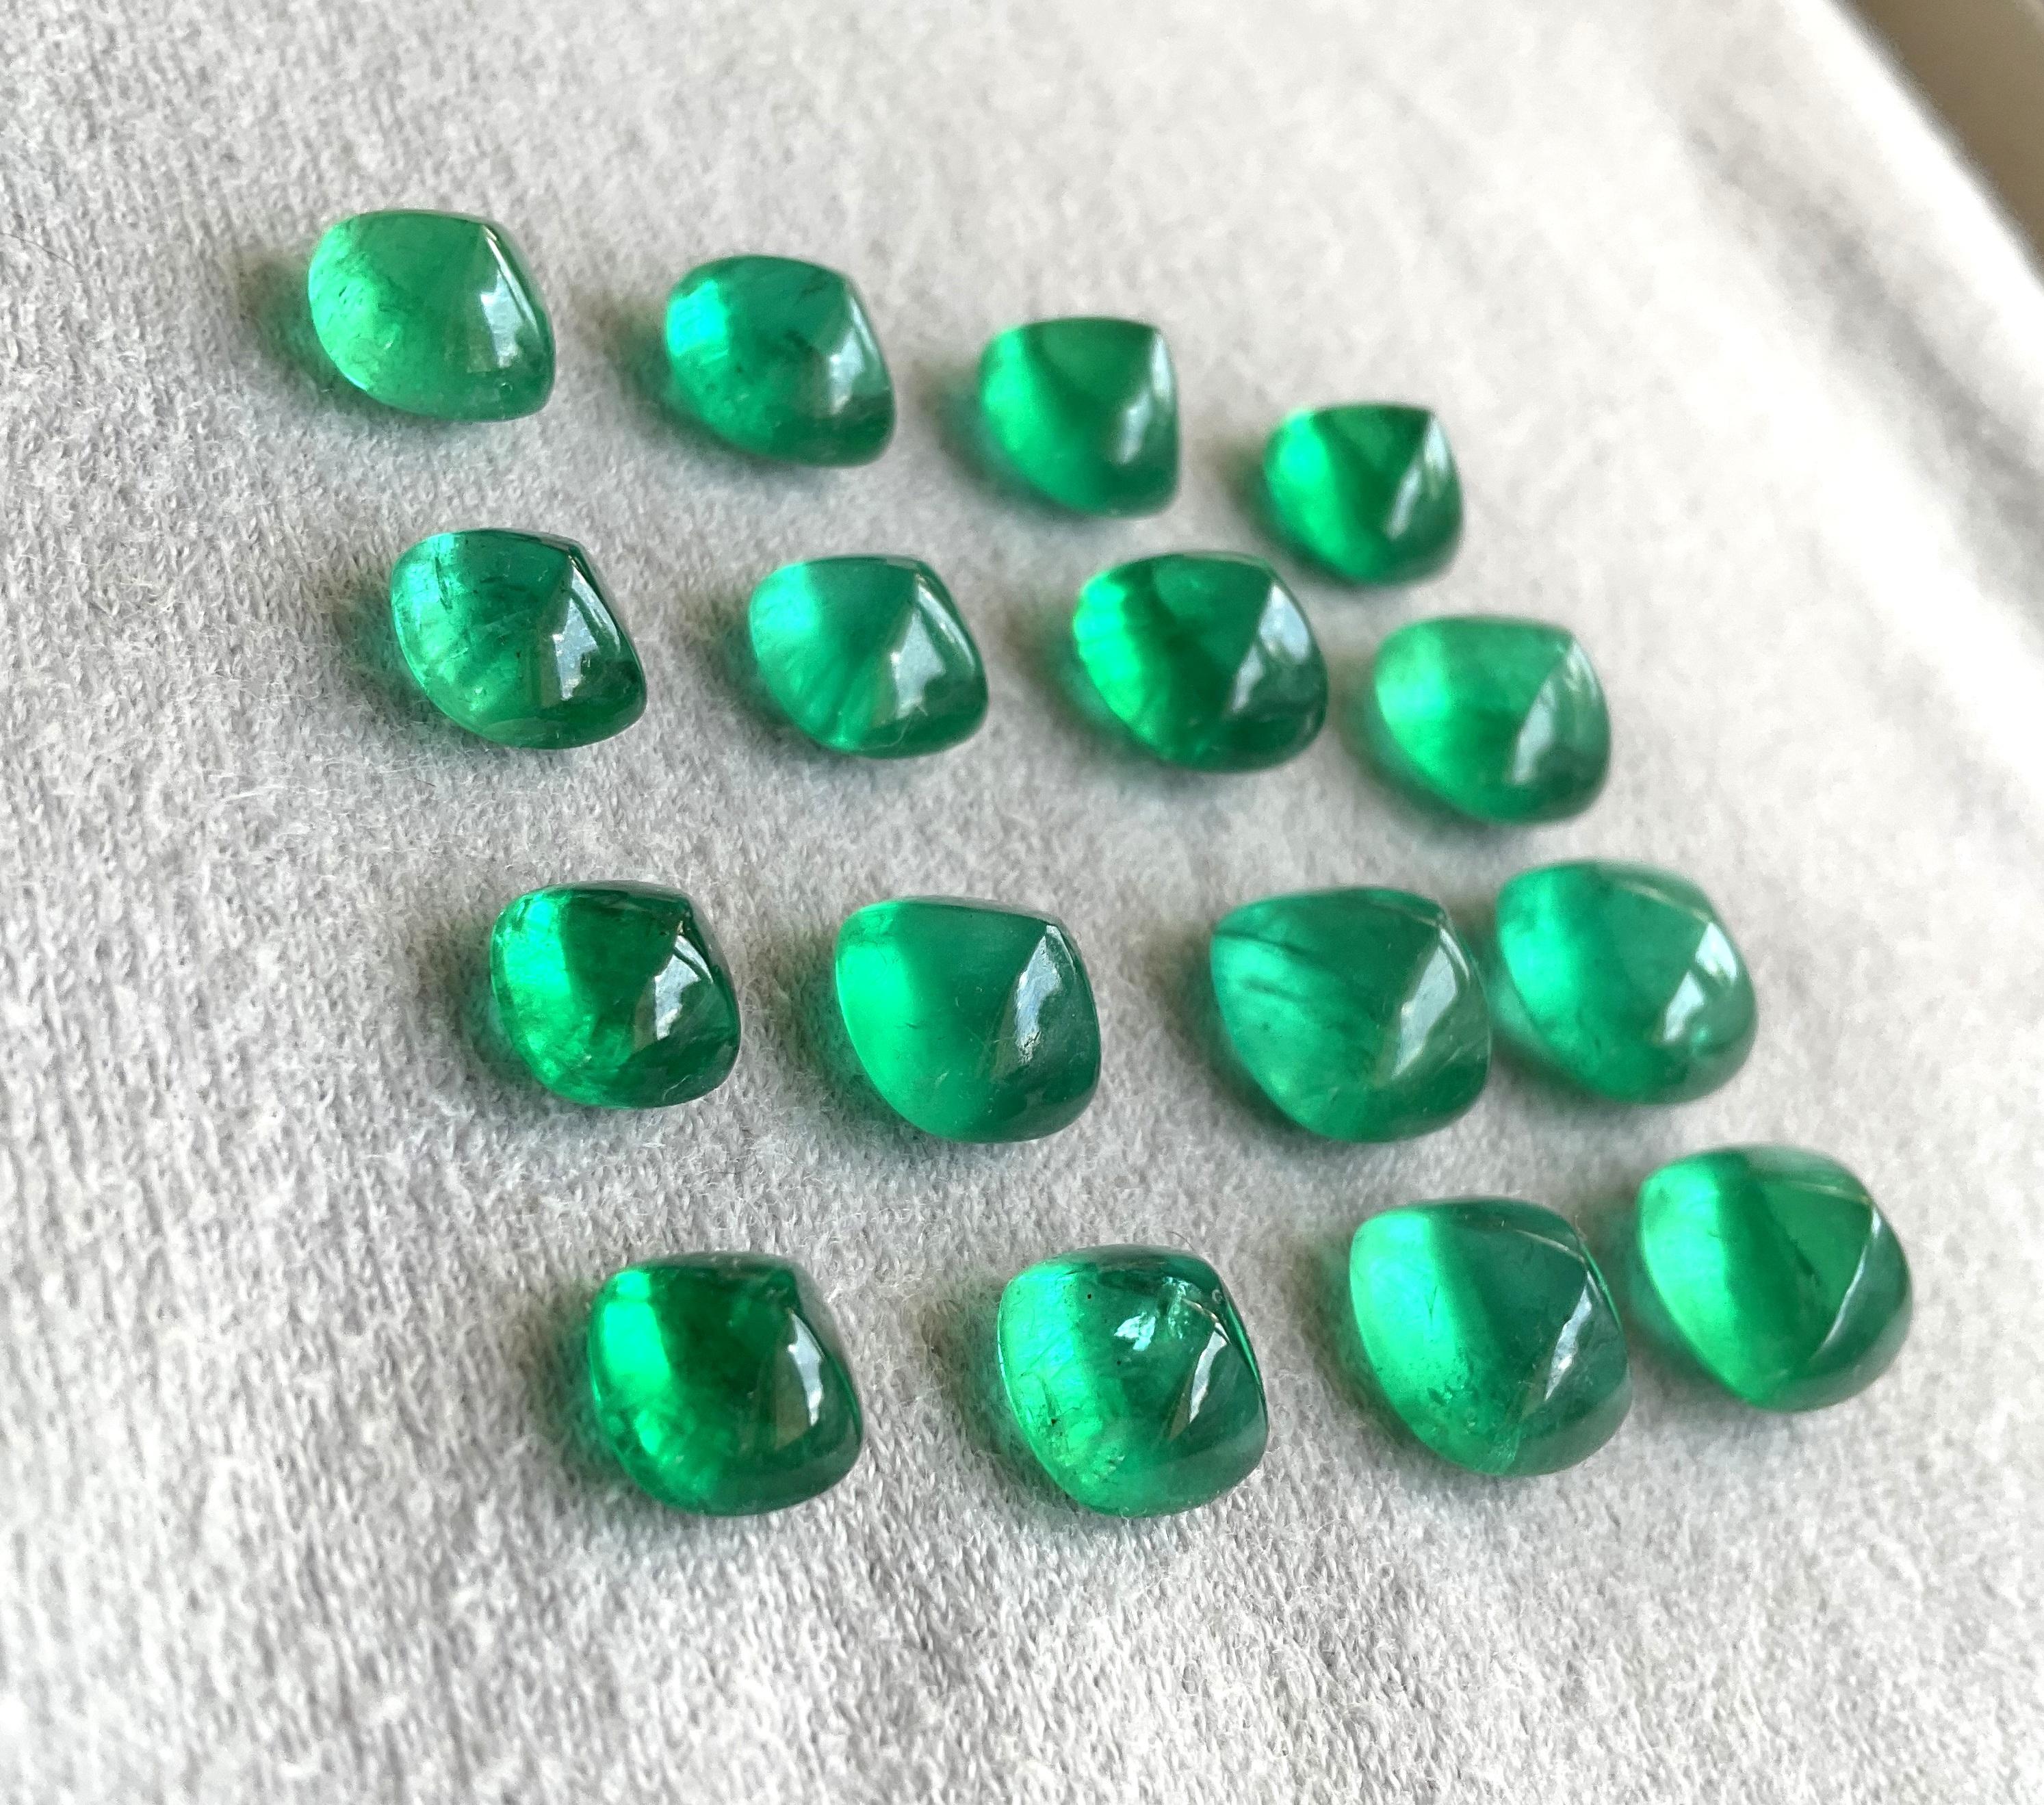 59.30 Carats Zambian Emerald Sugarloaf Cabochon Lot Top Quality Natural Gemstone For Sale 2